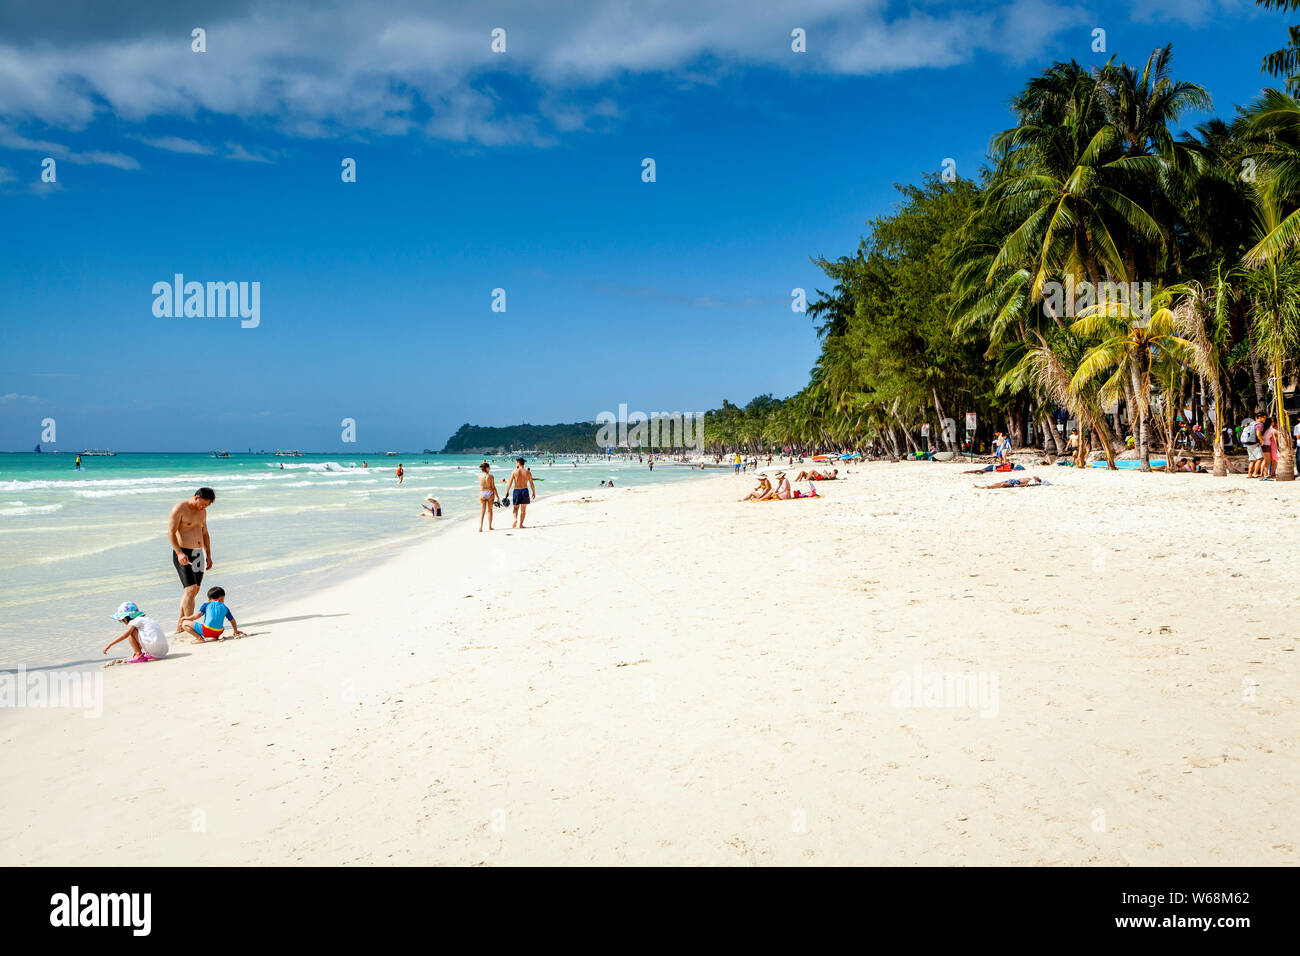 White Beach, Boracay, Aklan, Philippines Banque D'Images